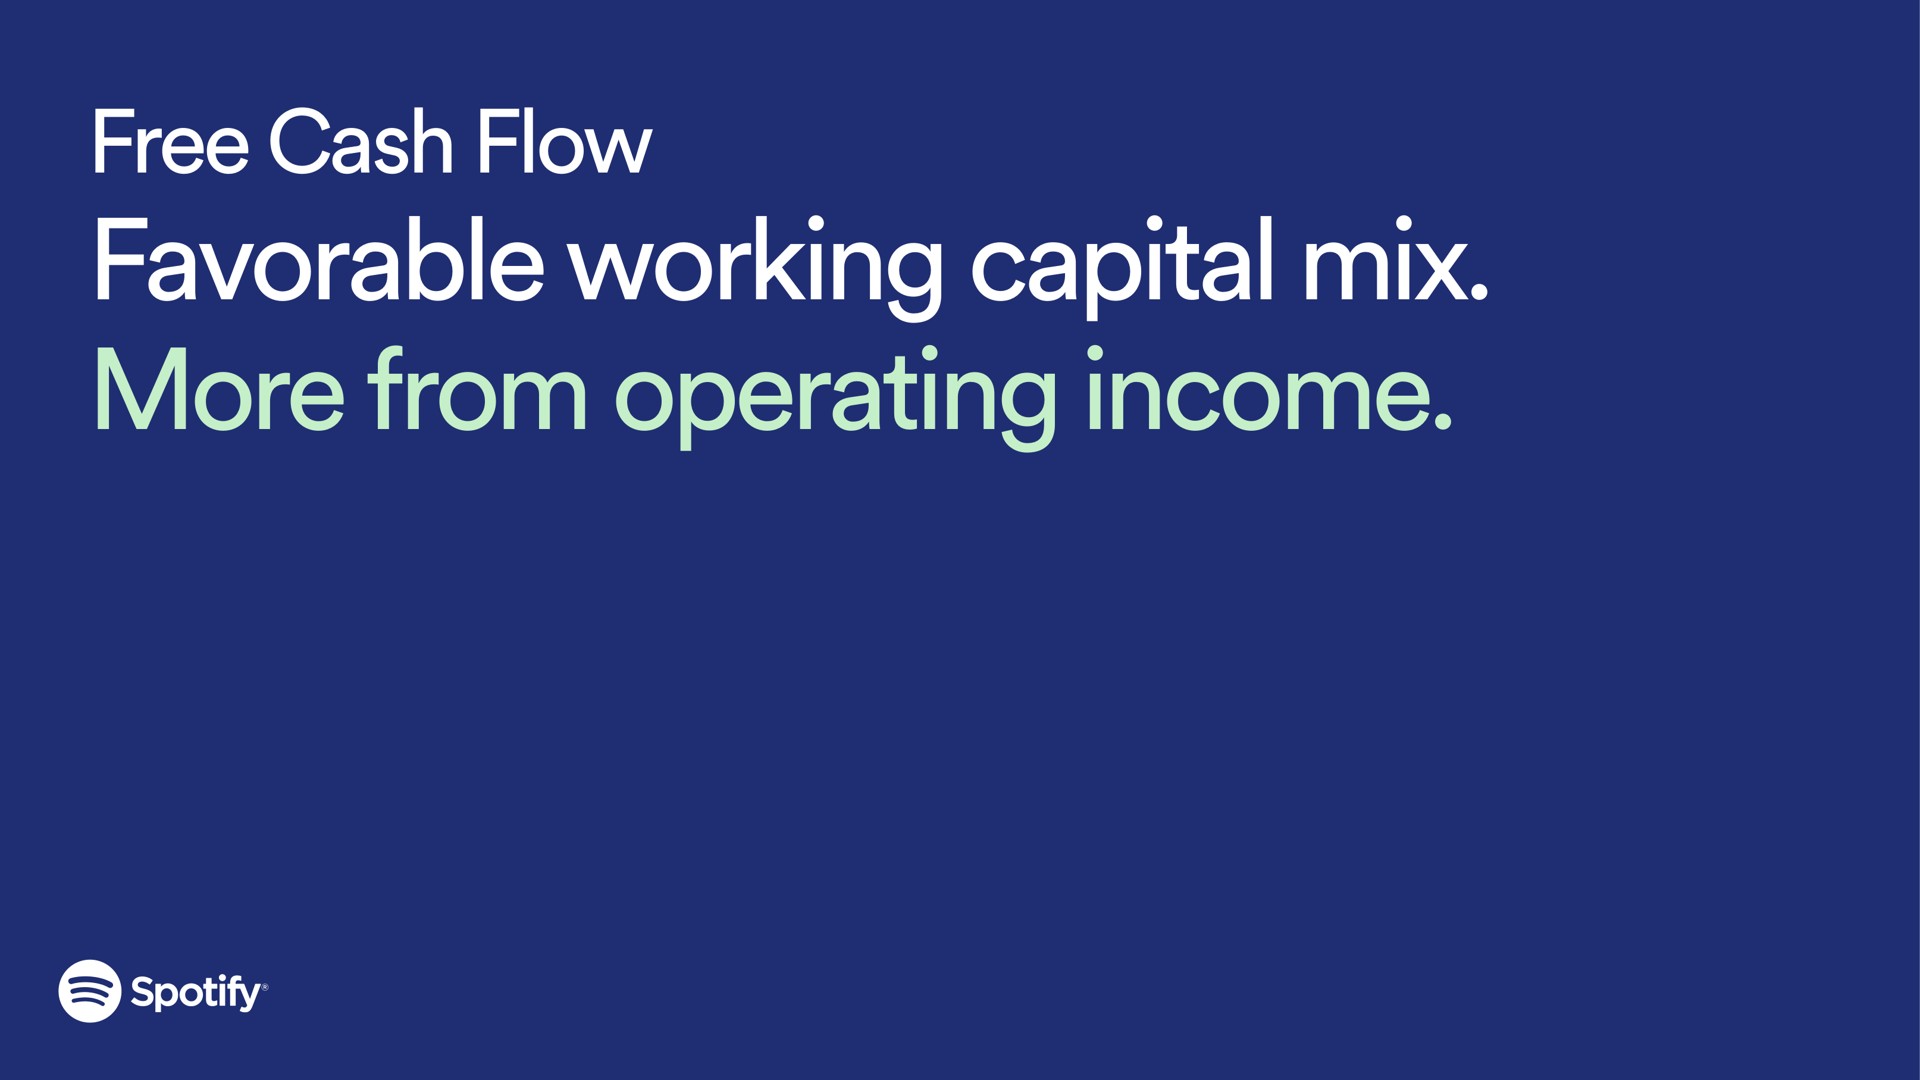 free cash flow favorable working capital mix more from operating income | Spotify